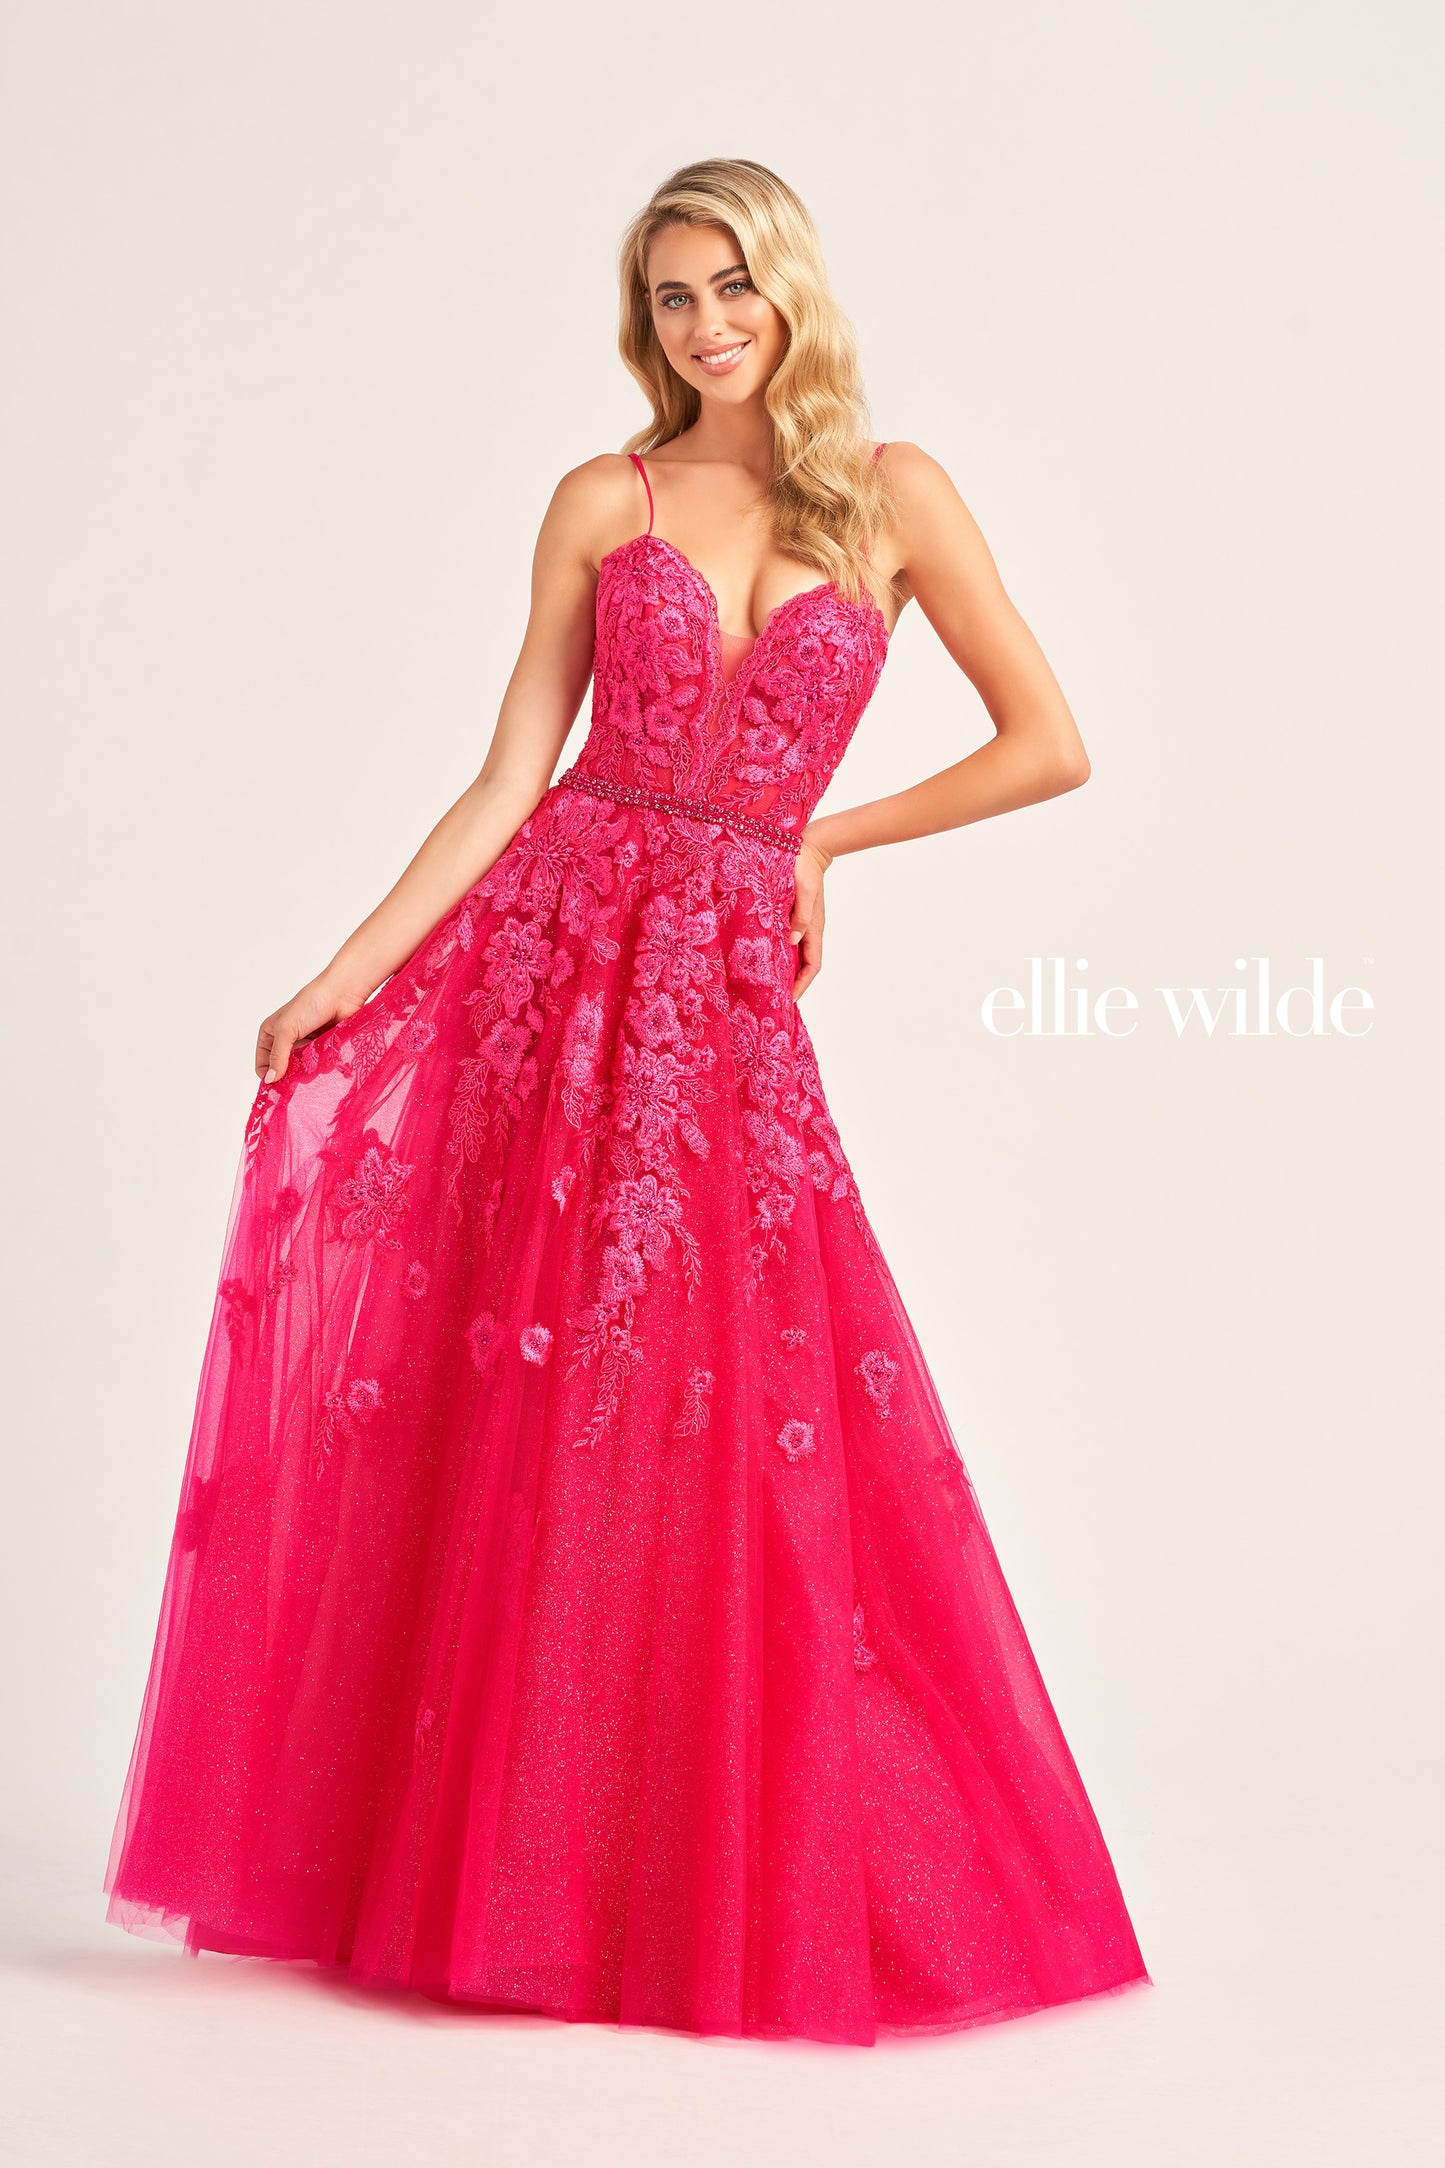 Look stunning in Ellie Wilde’s EW35016 long A Line dress. Crafted with shimmering Glitter Tulle, Lace Appliques, Organza and Stone Accents, this dress radiates elegance and artisan craftsmanship. Its one-shoulder style and Sweetheart neckline fit the body perfectly, while its pockets provide added convenience. Its natural waistline and long length adds that perfect finishing touch.  COLOR: ORANGE, PINK, YELLOW, MAGENTA, EMERALD, SEA GLASS, STRAWBERRY, BLUEBELL SIZE: 00 - 24